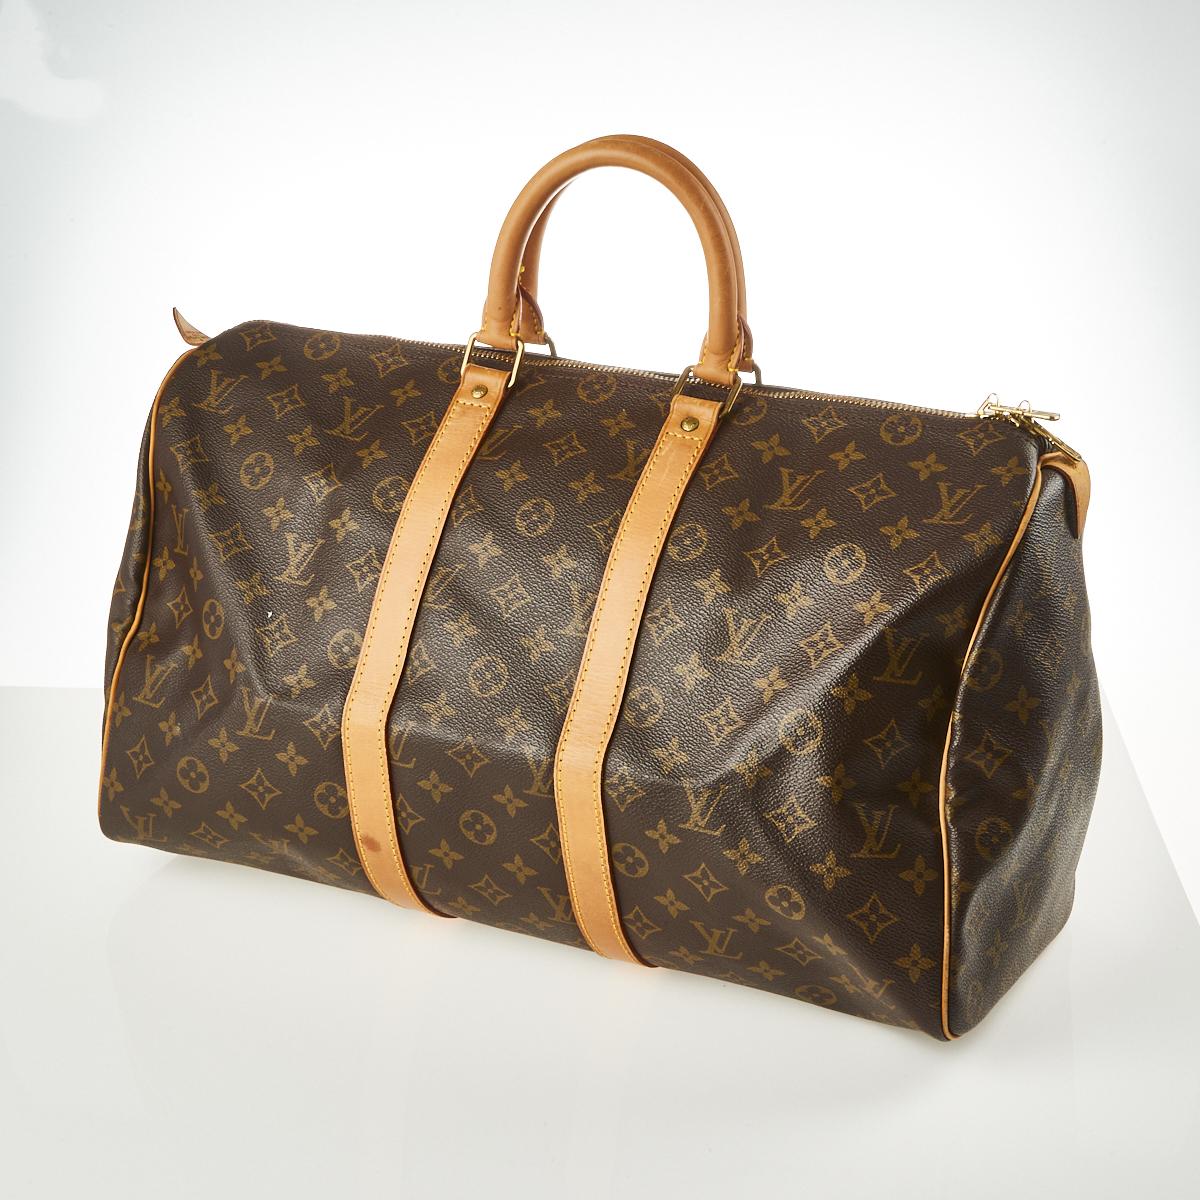 Sold at Auction: Louis Vuitton 45 Keepall Leather Bag